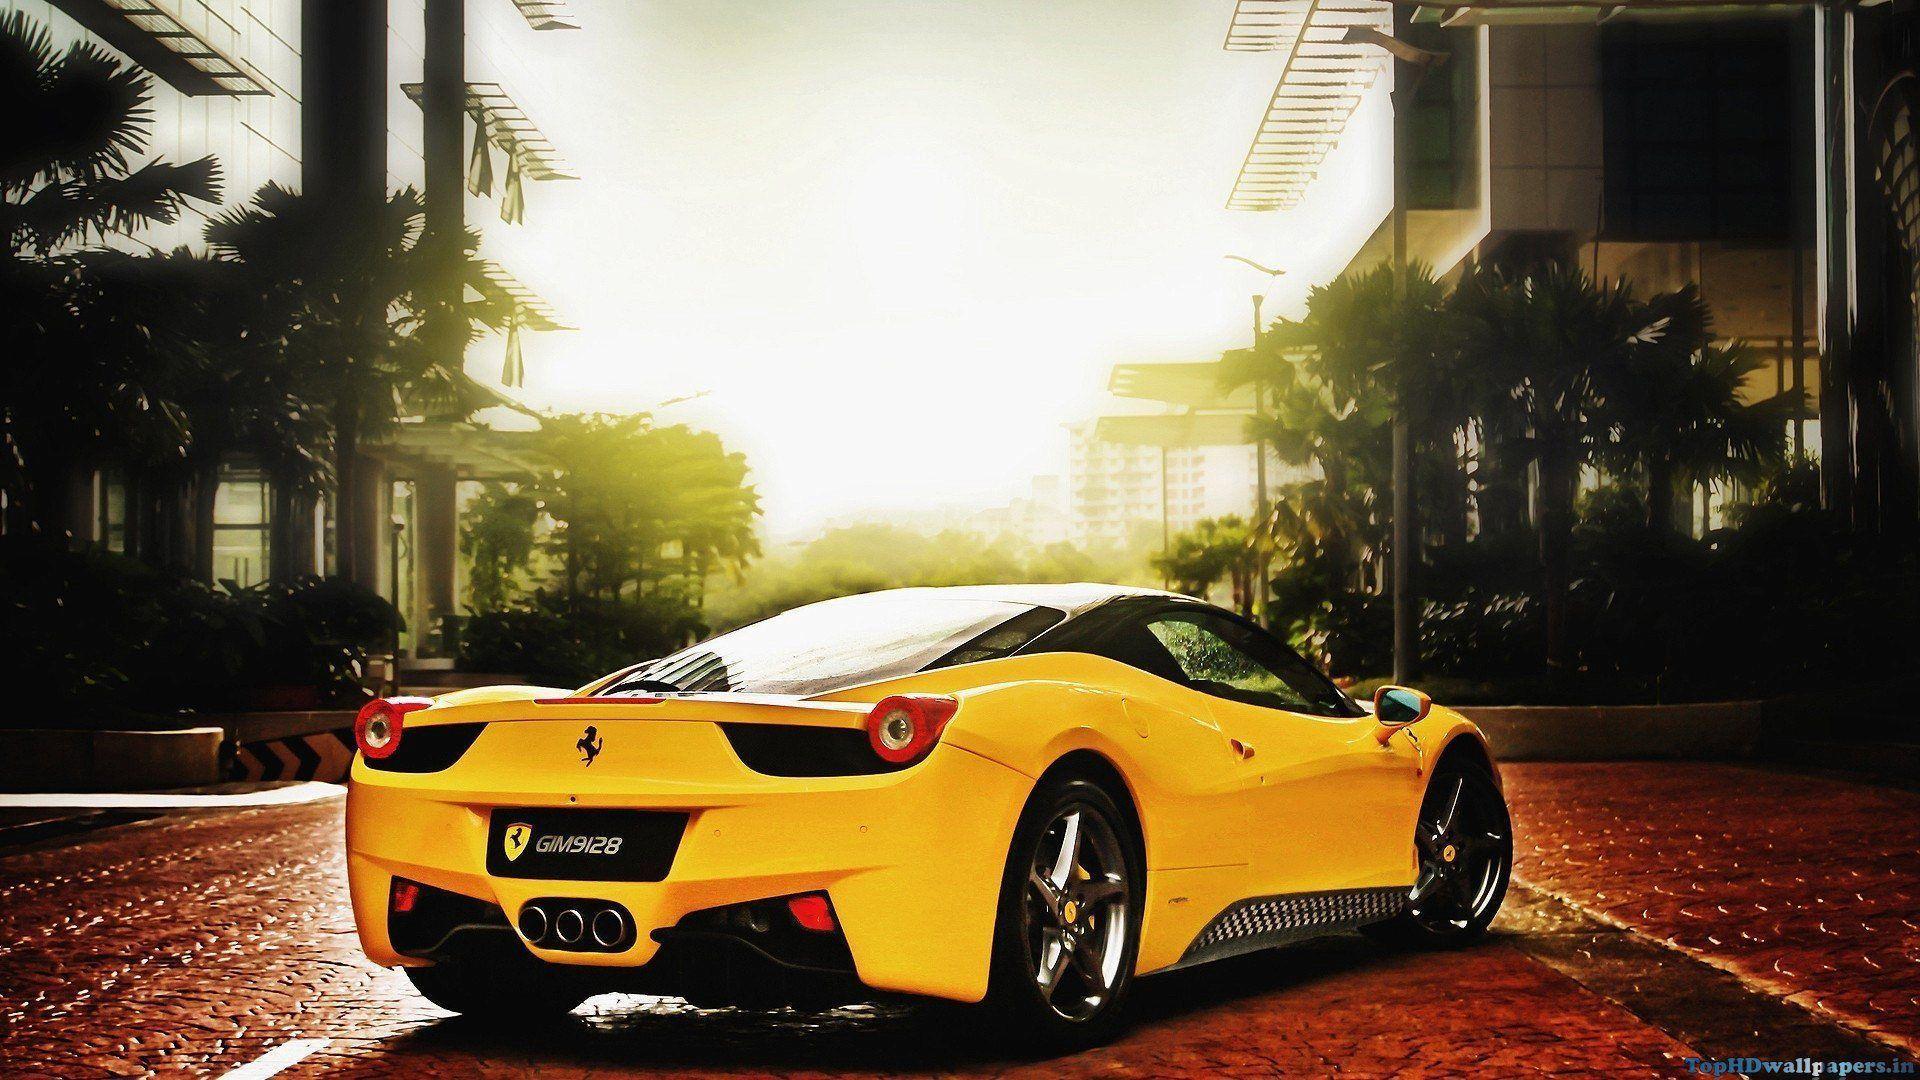 Ferrari Cars Hd Wallpapers For Android Apk Download